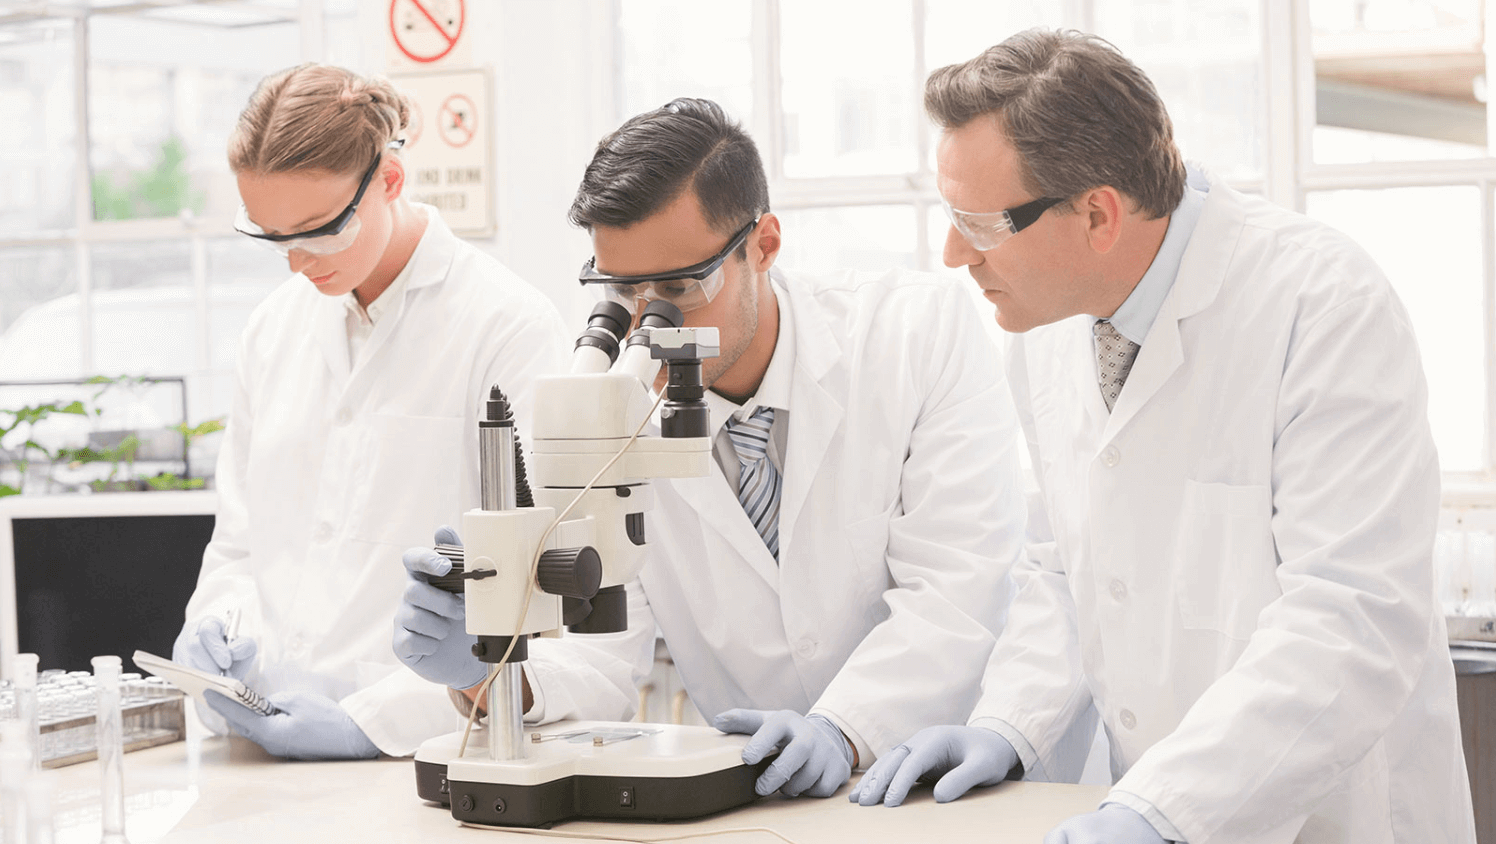 Healthcare proffesionals looking into a microscope